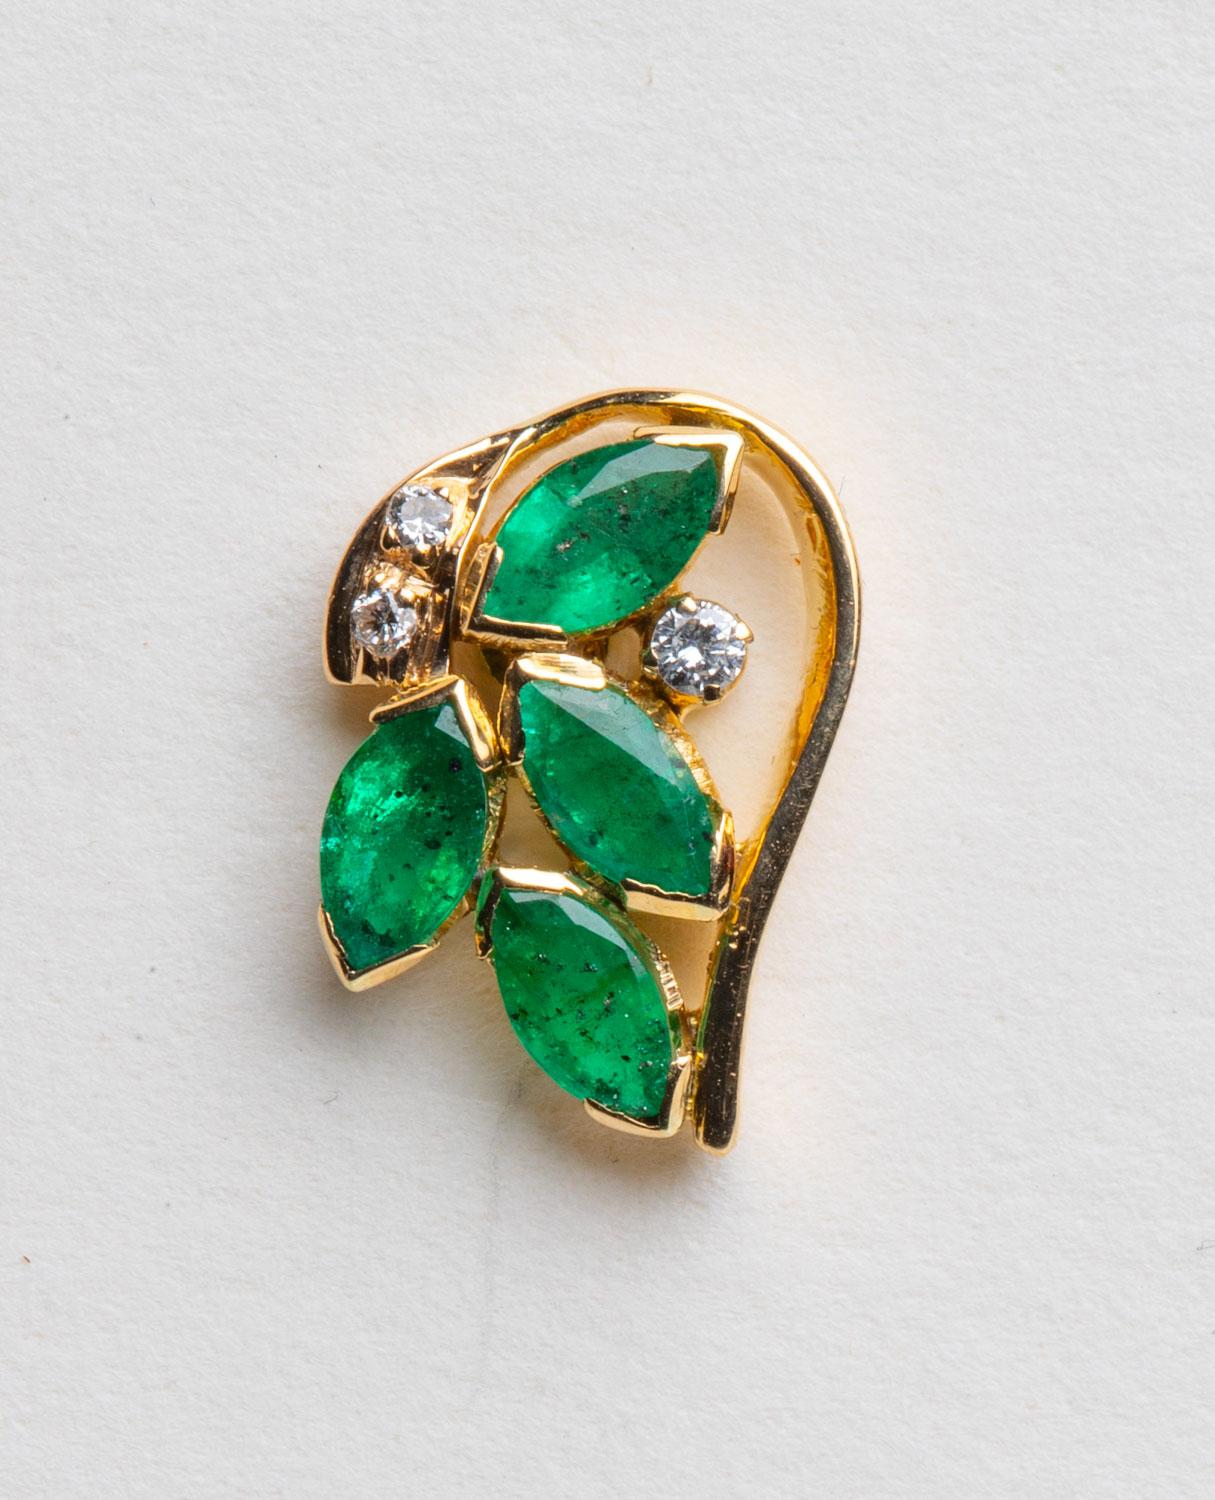 A lovely cluster of marquise cut emeralds with round, brilliant cut diamonds set in 18K gold, for pierced ears.